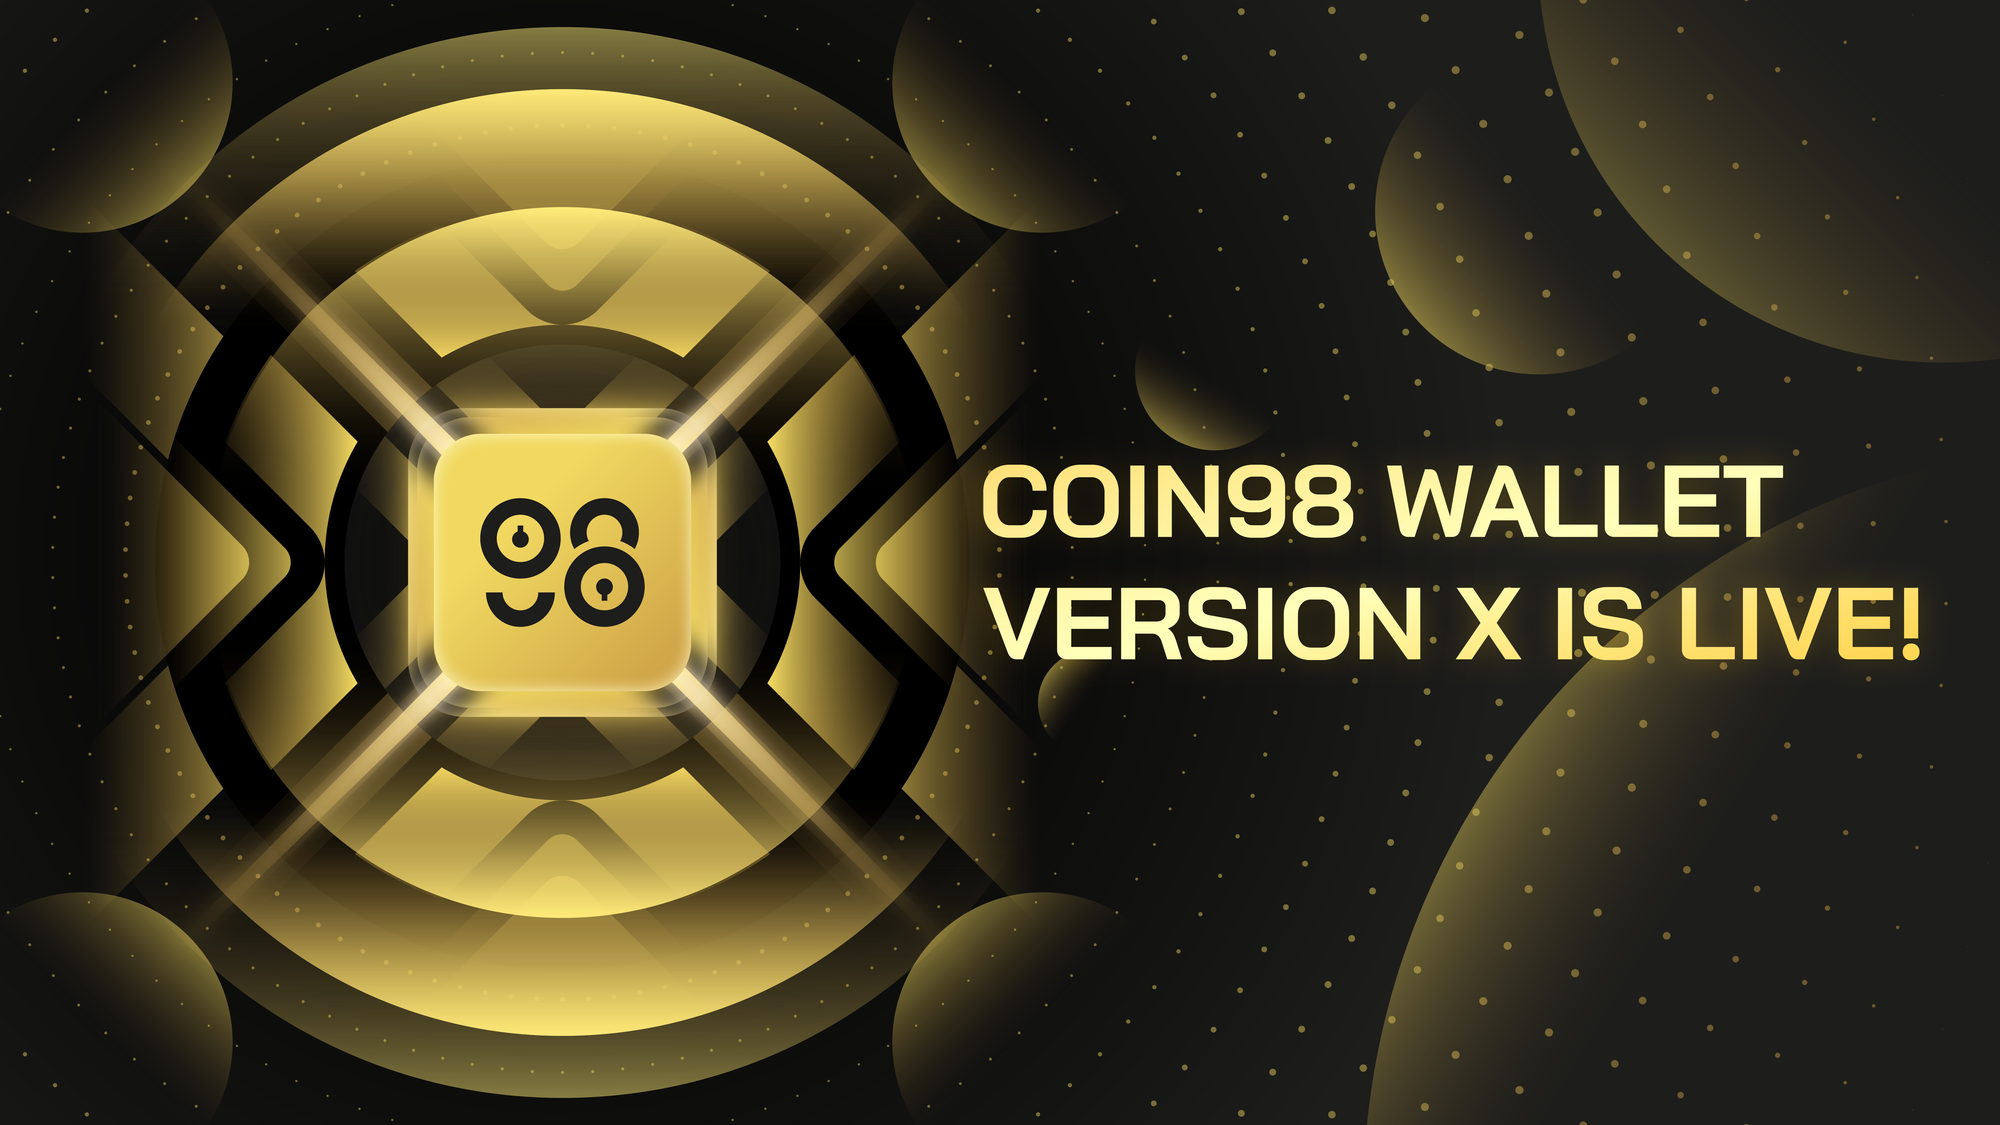 Coin98 Wallet version X - the Revolutionary Milestone is now LIVE